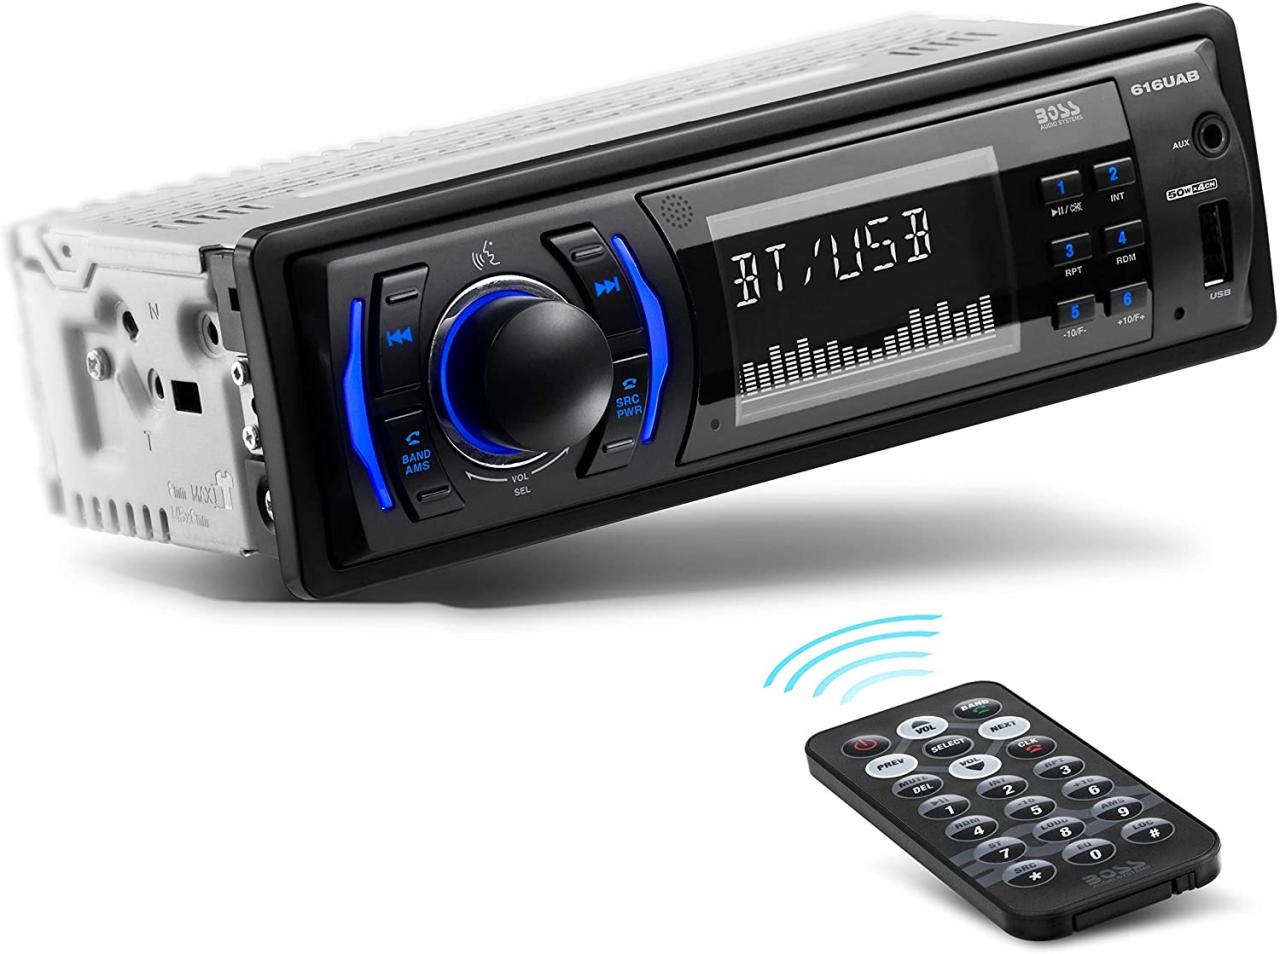 Buy BOSS Audio Systems 616UAB Multimedia Car Stereo - Single Din LCD  Bluetooth Audio and Hands-Free Calling, Built-in Microphone, MP3/USB,  Aux-in, AM/FM Radio Receiver Online in Hong Kong. B01CG8N0H8